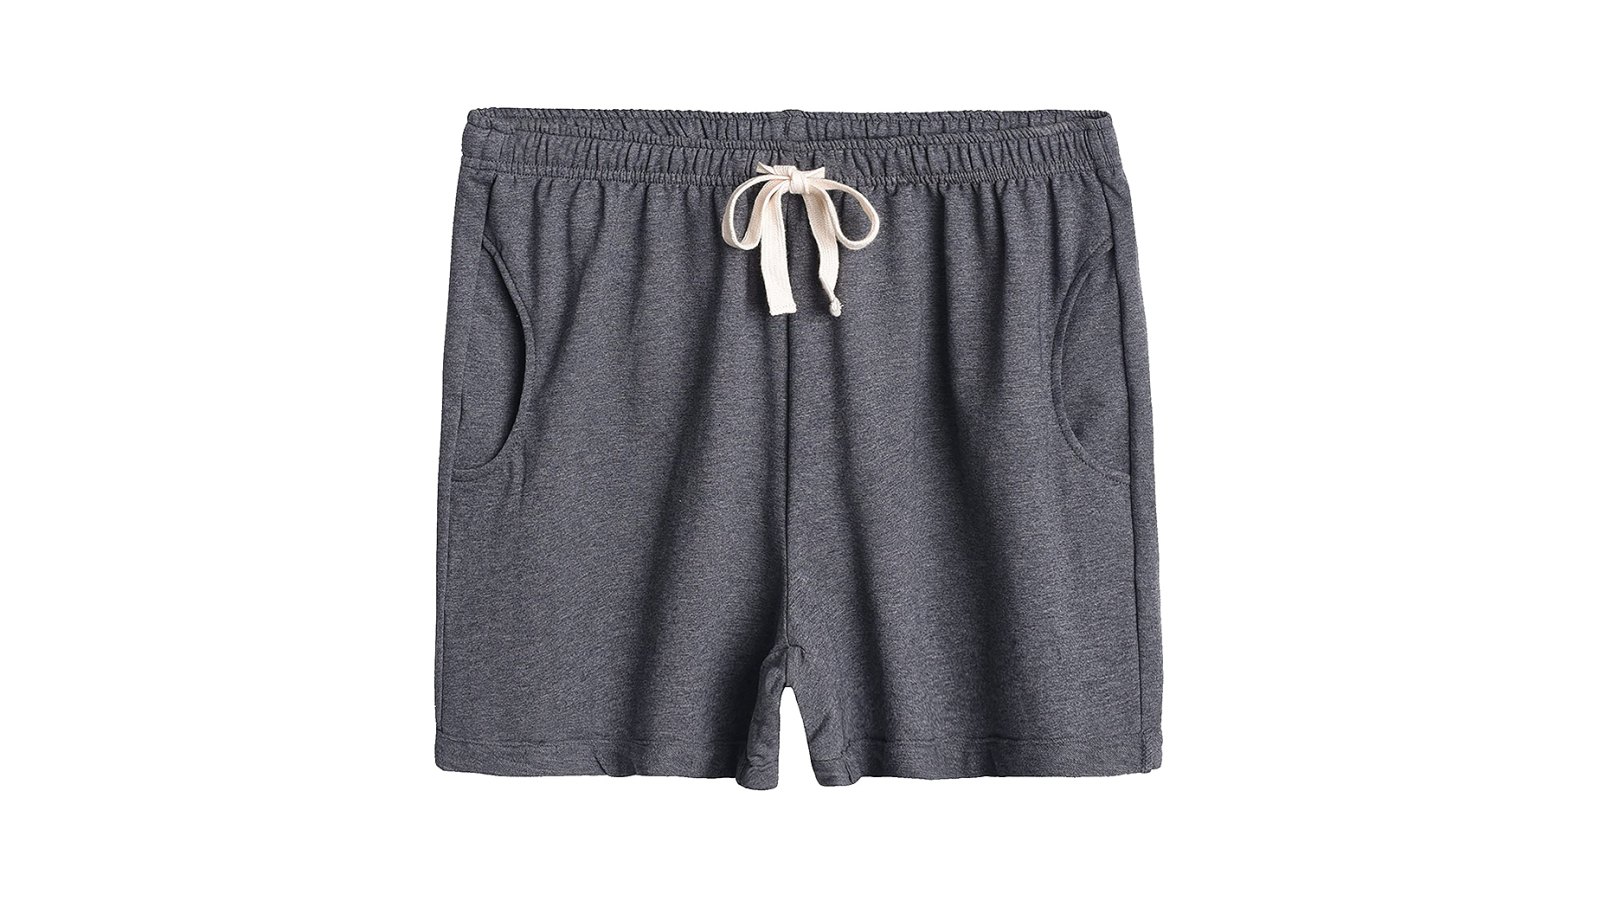 Latuza Sweat Shorts Are Comfy, Cute Summer Essentials | Us Weekly